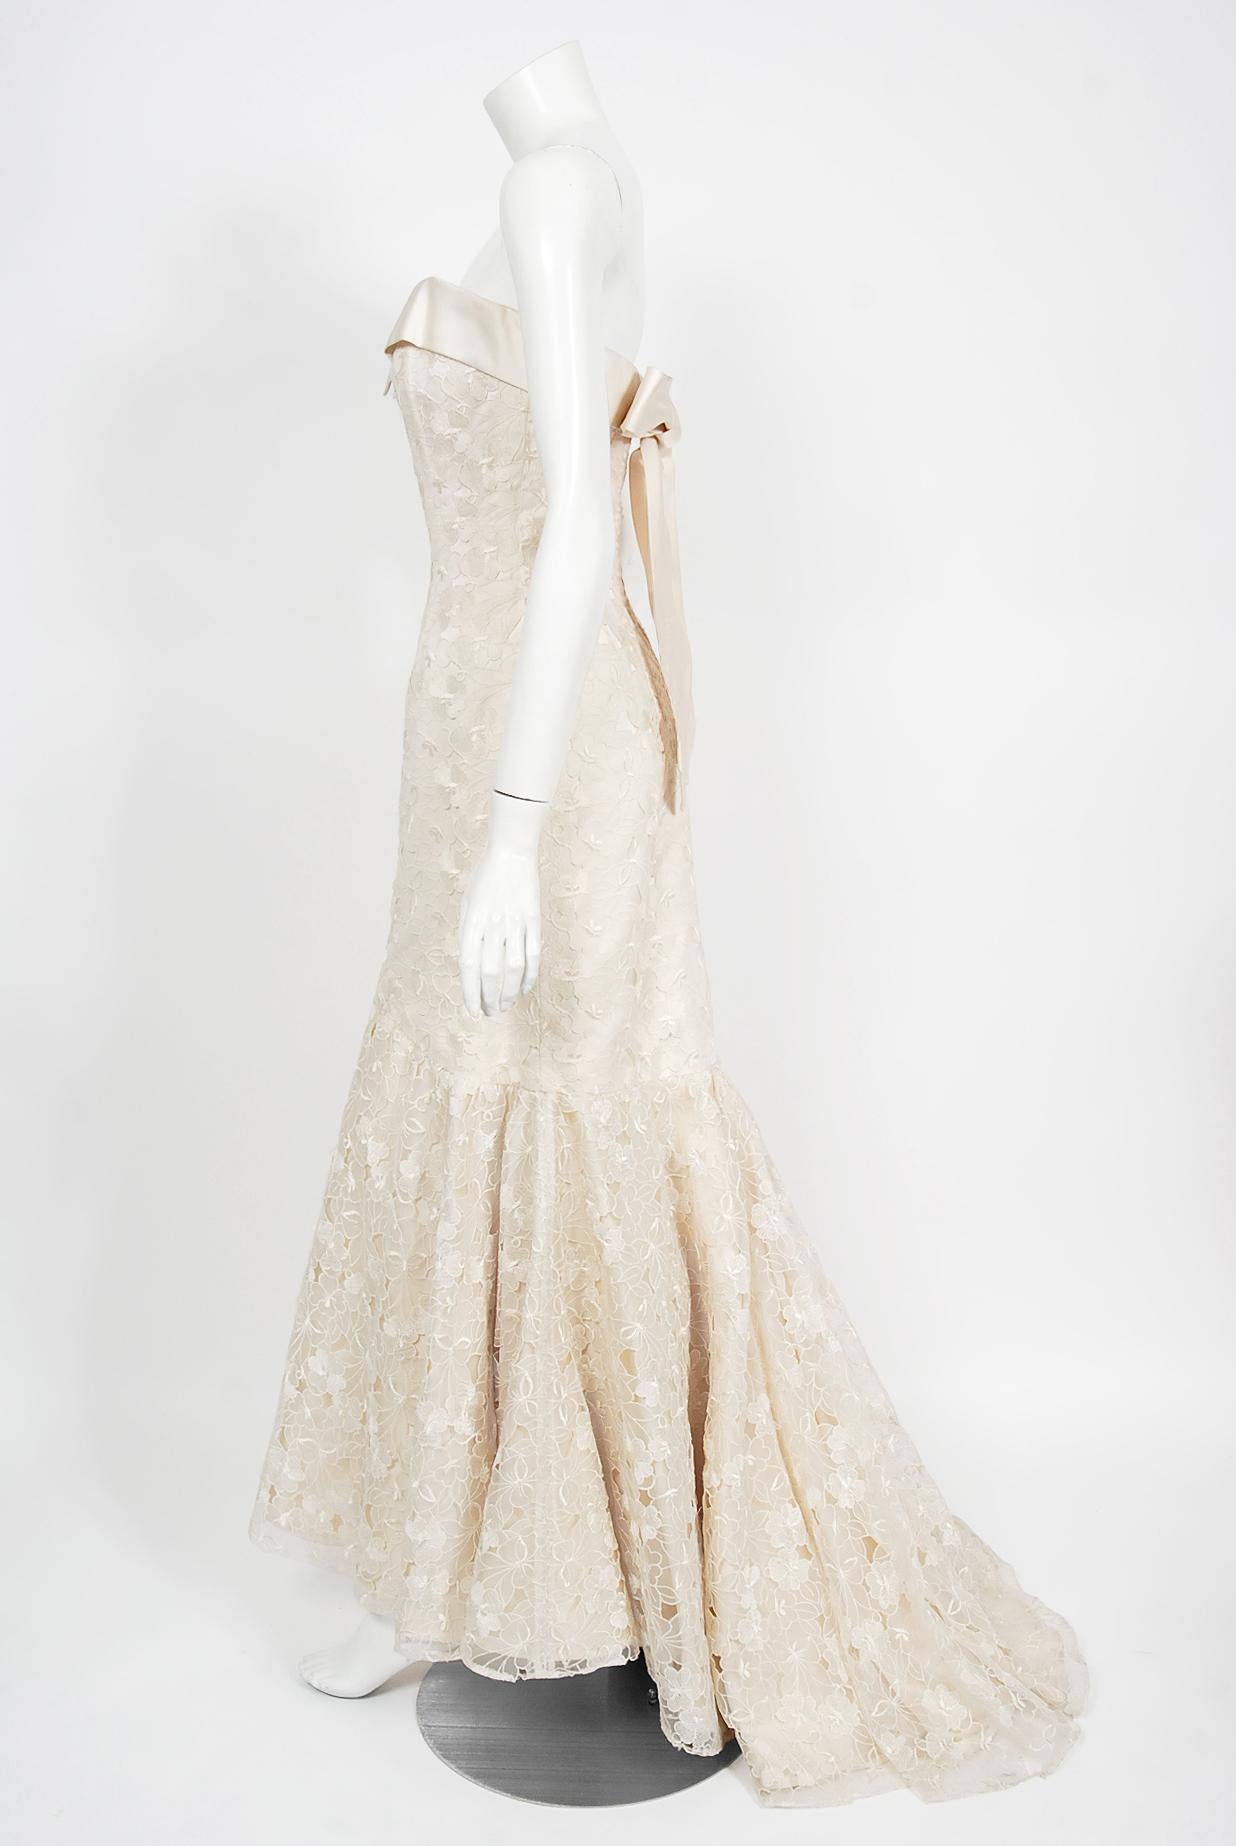 Beige Vintage 1990s Nolan Miller Couture Ivory Embroidered Silk Strapless Mermaid Gown For Sale